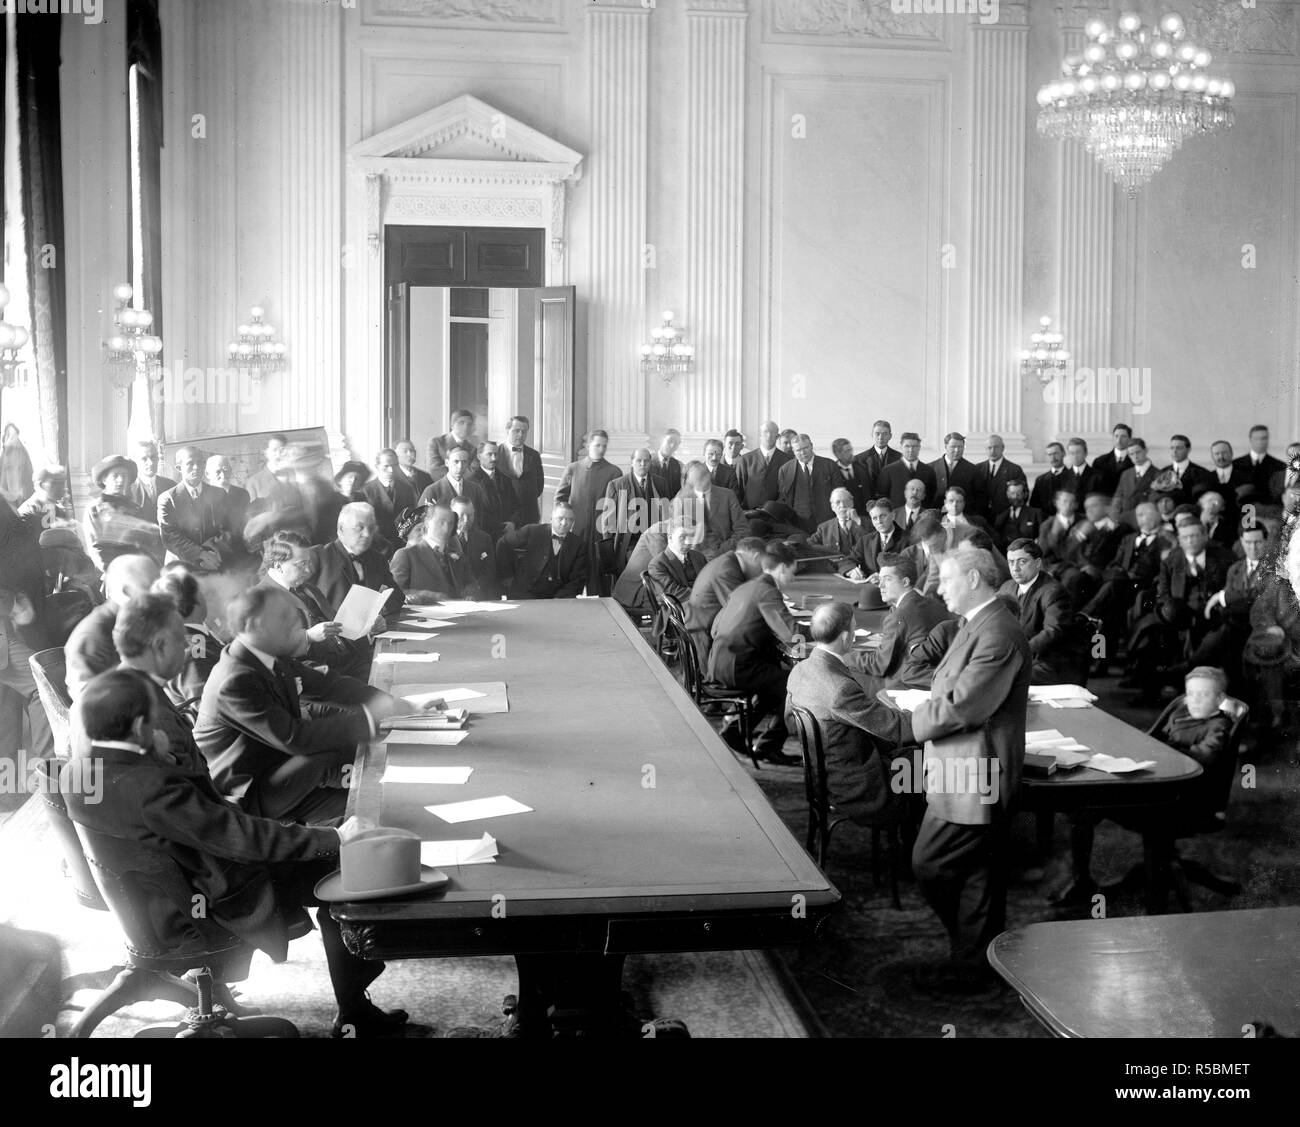 Meeting of politicians in early 1900s America ca. 1910-1920 Stock Photo ...